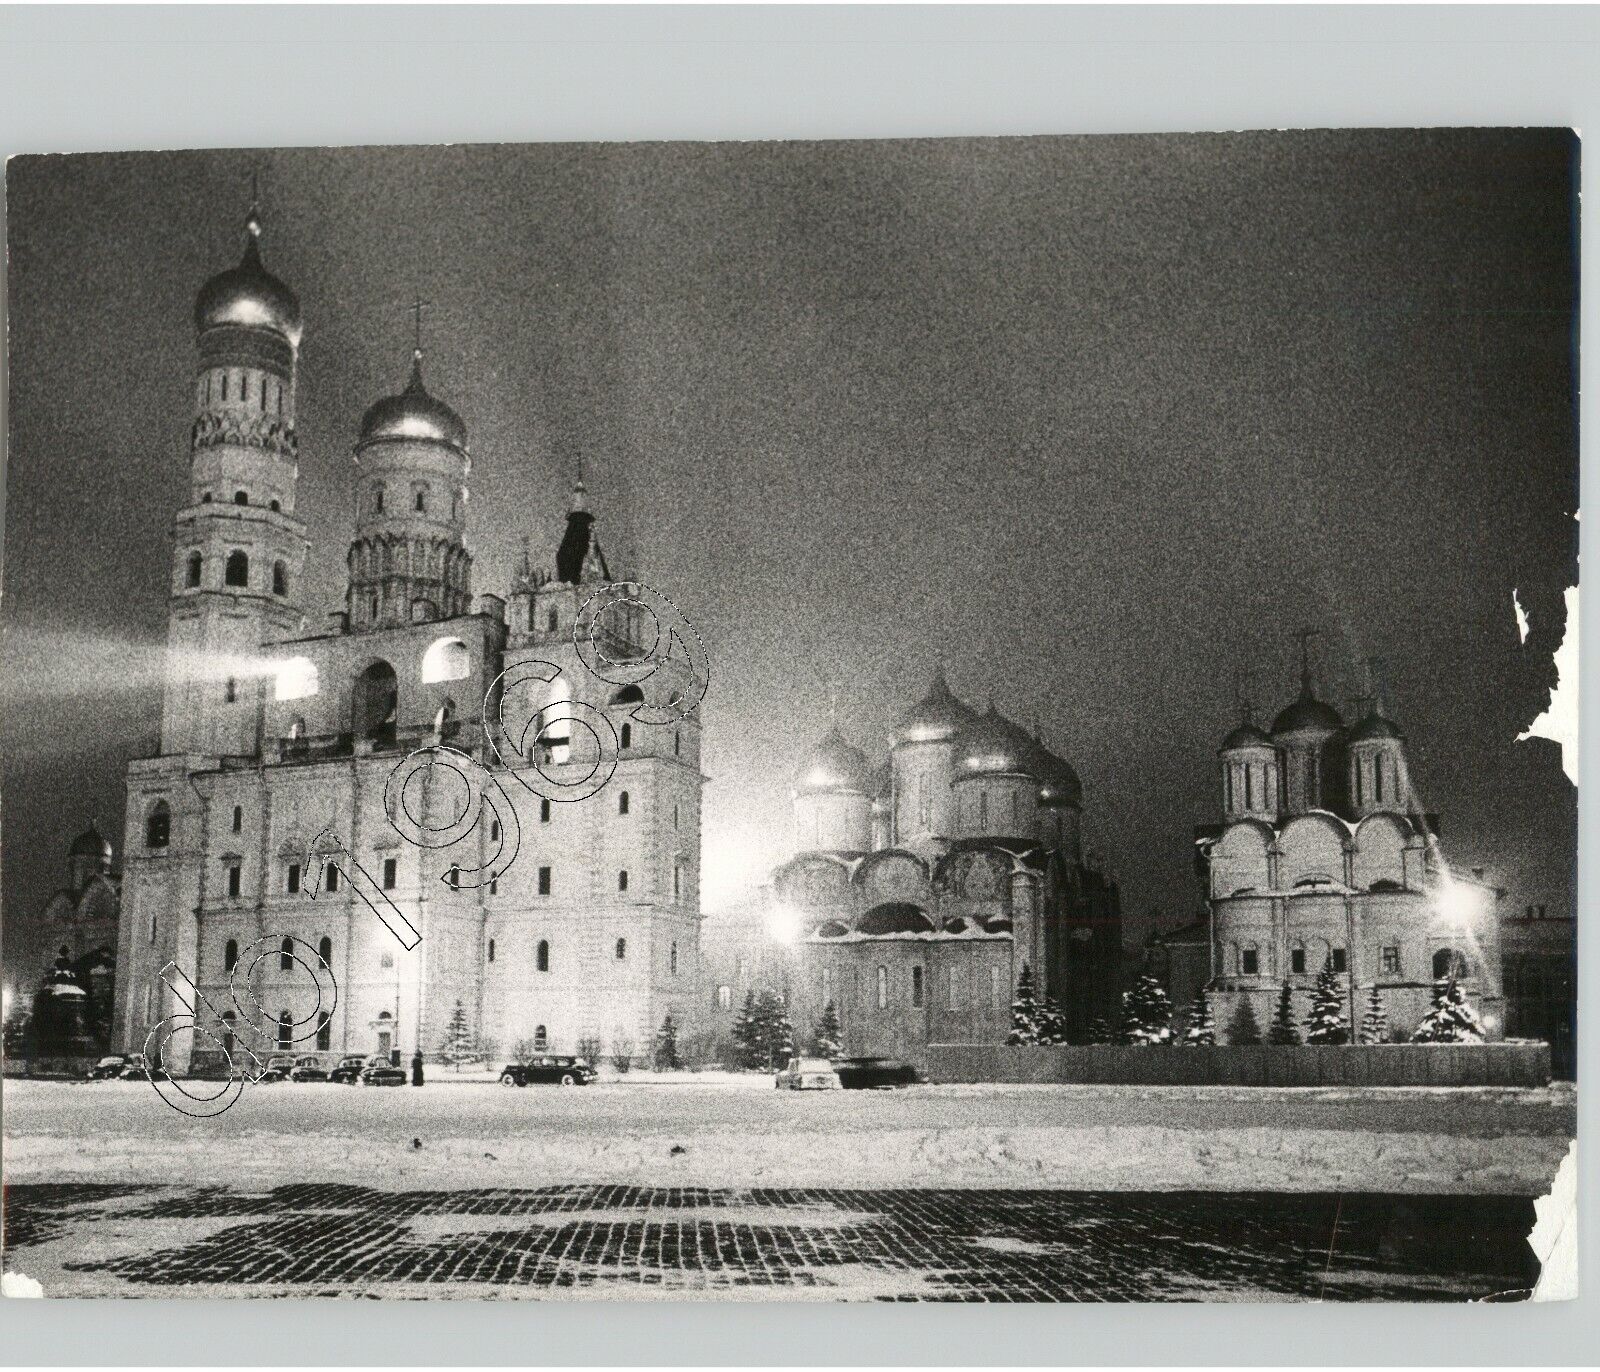 VTG ARCHITECTURE Interior Court Of The Kremlin @ Moscow 1940s USSR Press Photo 